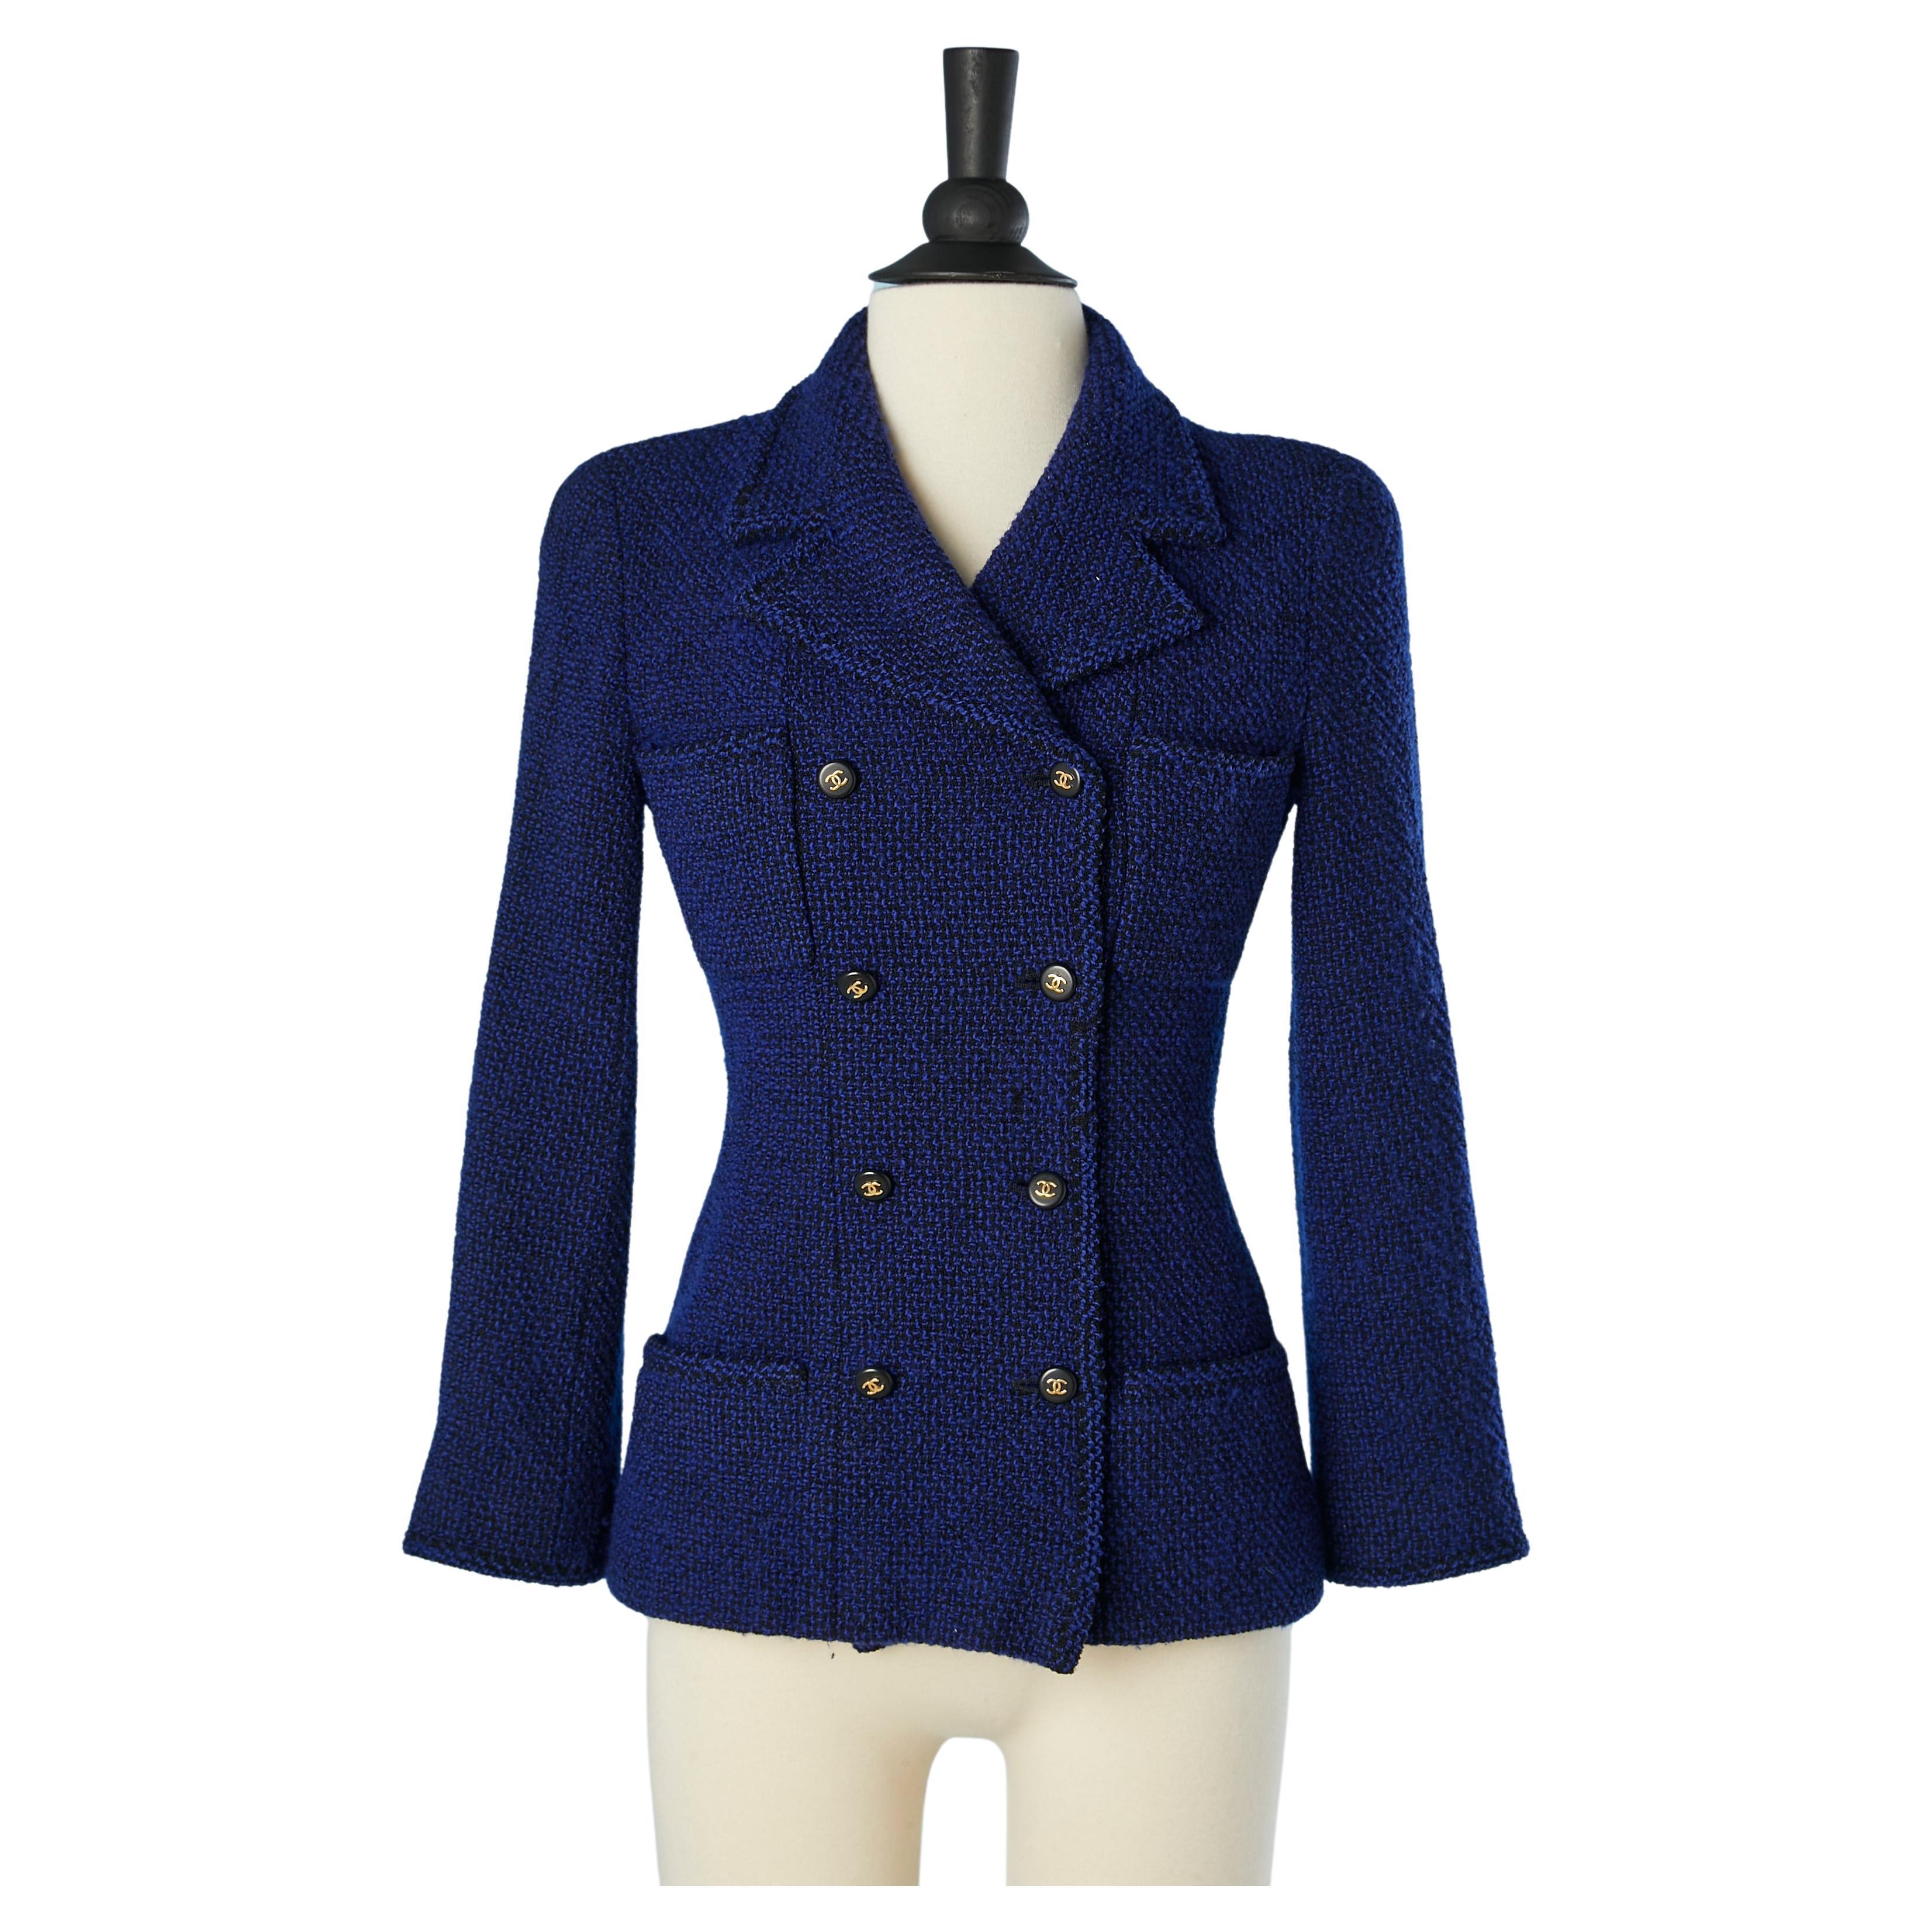 Blue Tweed Double Breasted Jacket with Branded Buttons Chanel Boutique